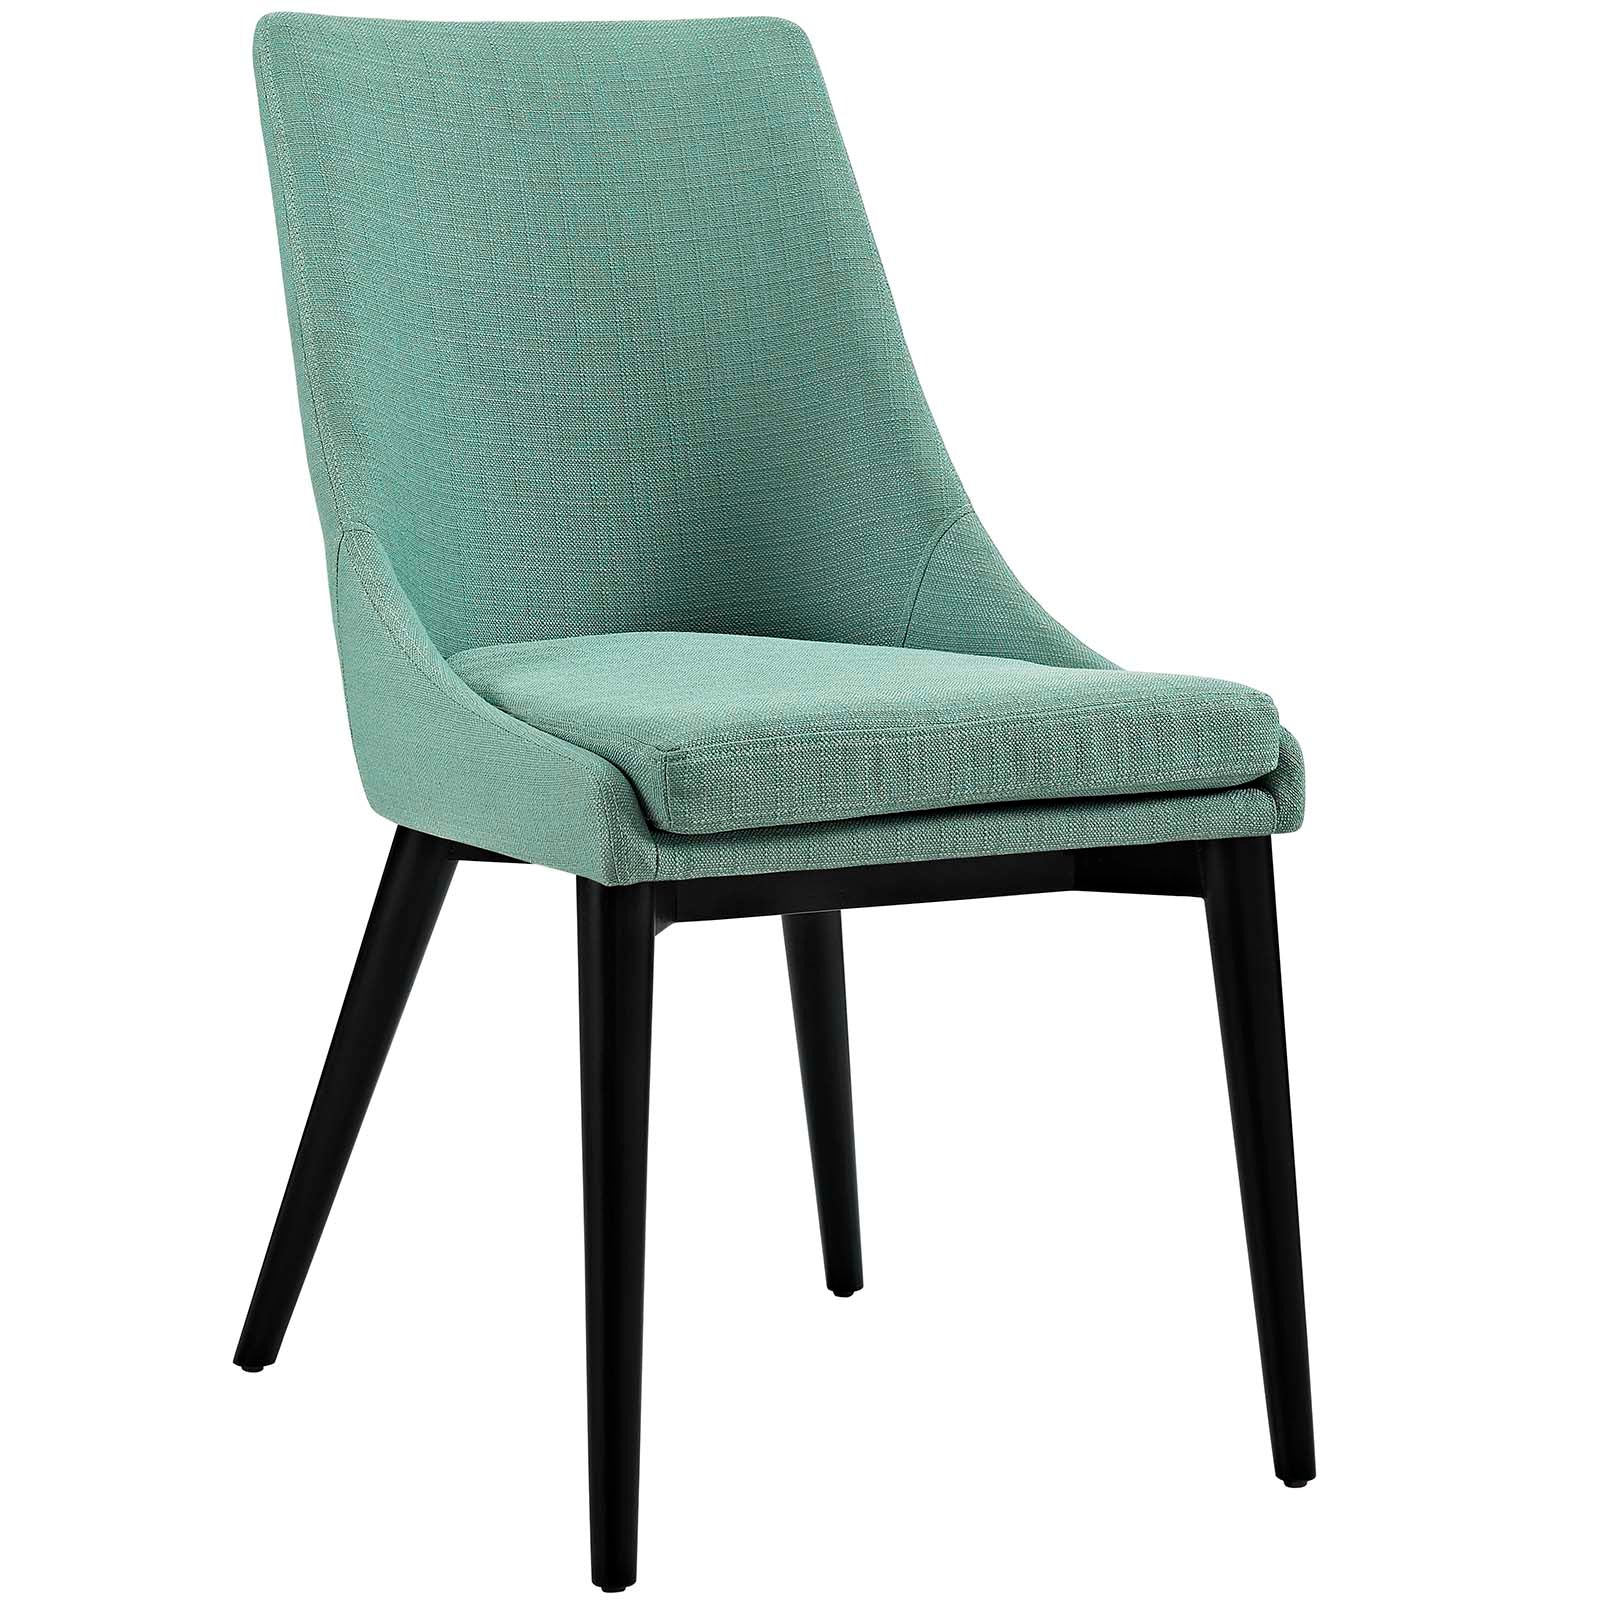 Modway Dining Chairs - Viscount Fabric Dining Chair Laguna